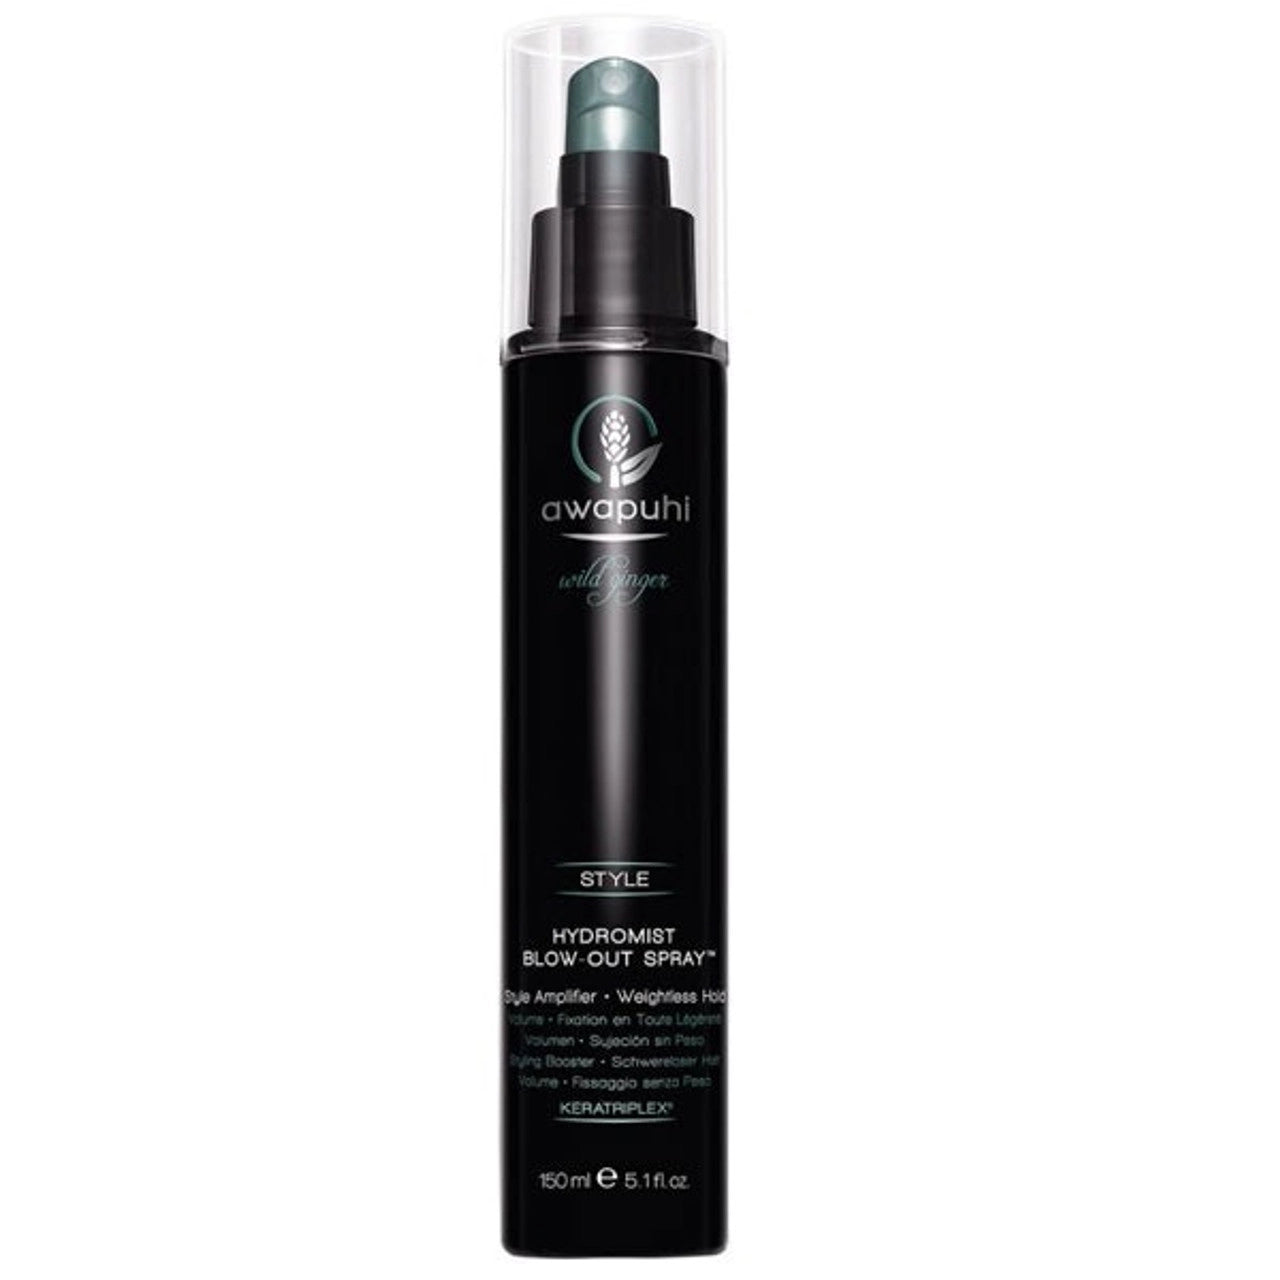 Paul Mitchell Awapuhi Wild Ginger - Hydro Mist Blow-Out Spray - Kess Hair and Beauty